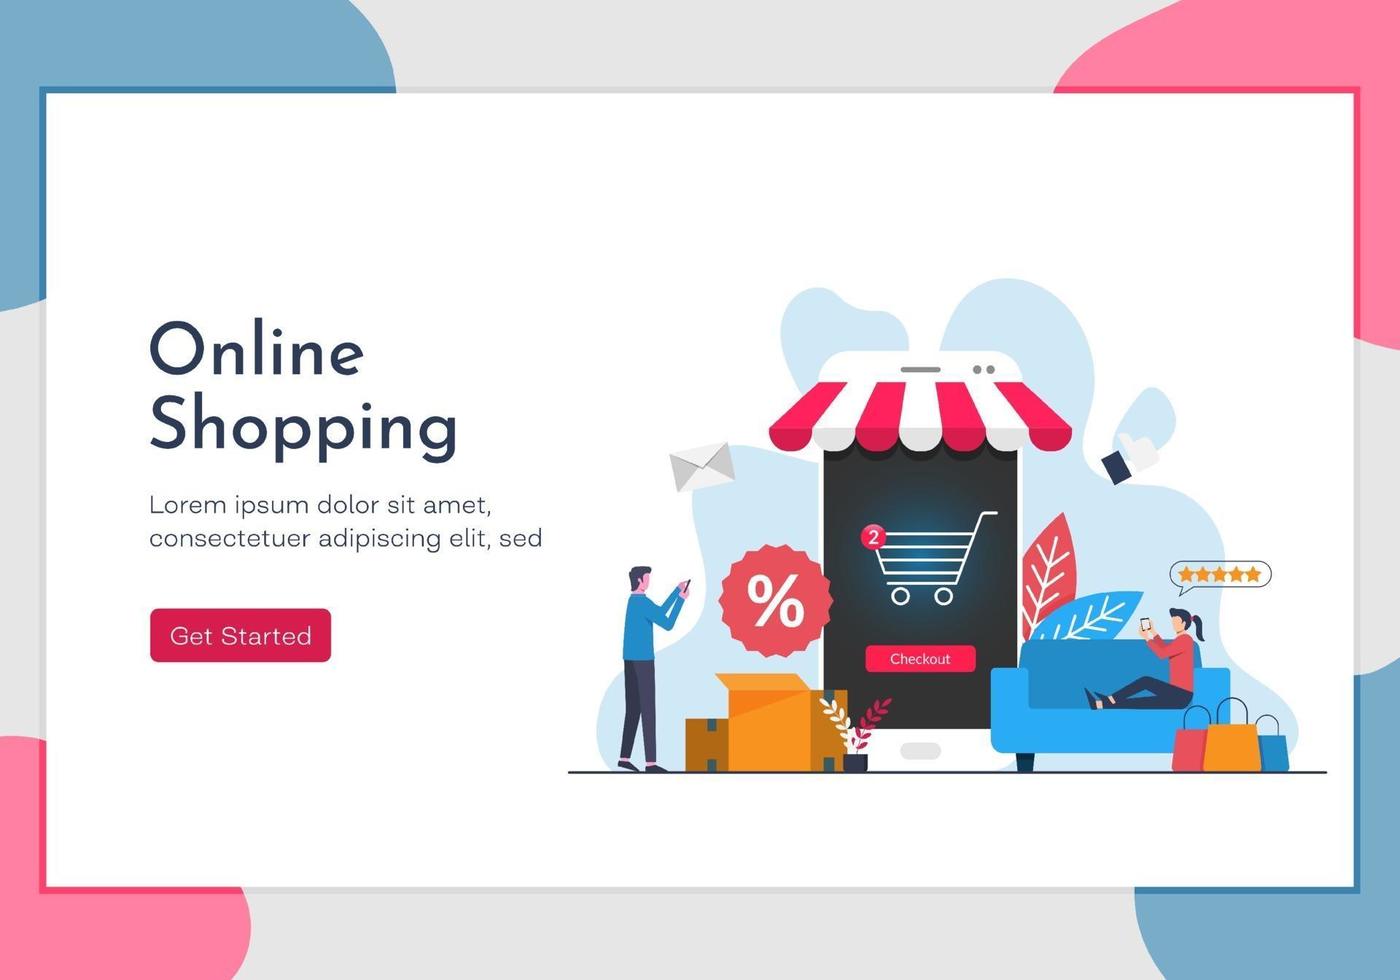 Online shopping concept with people character using their gadget to shops. Landing page template of a lifestyle illustration. vector